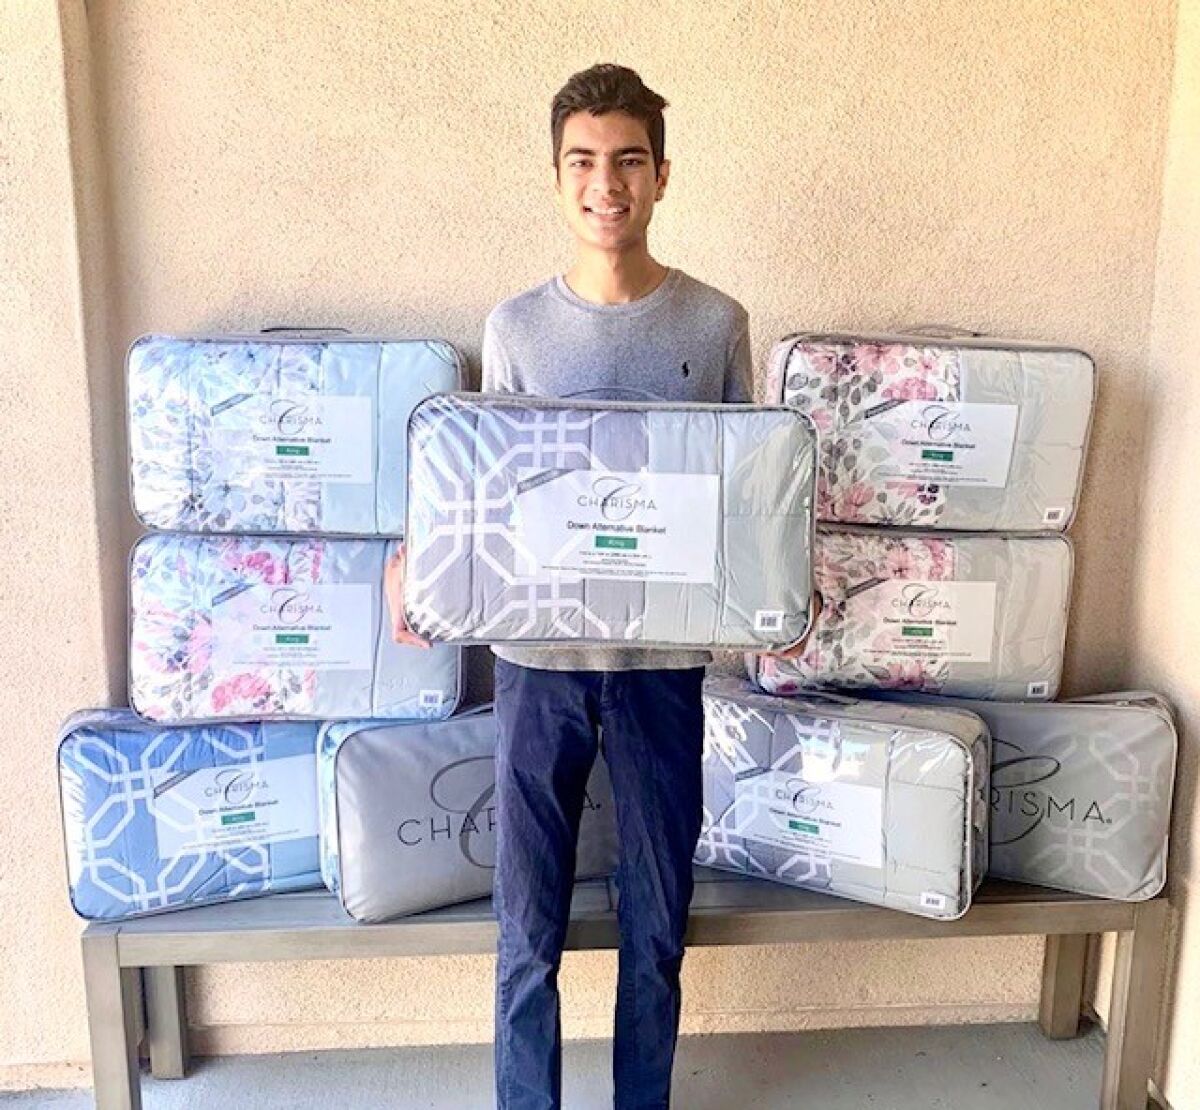 Jaiv Doshi brings a donation of quilts to the La Posada shelter in Carlsbad during the pandemic.